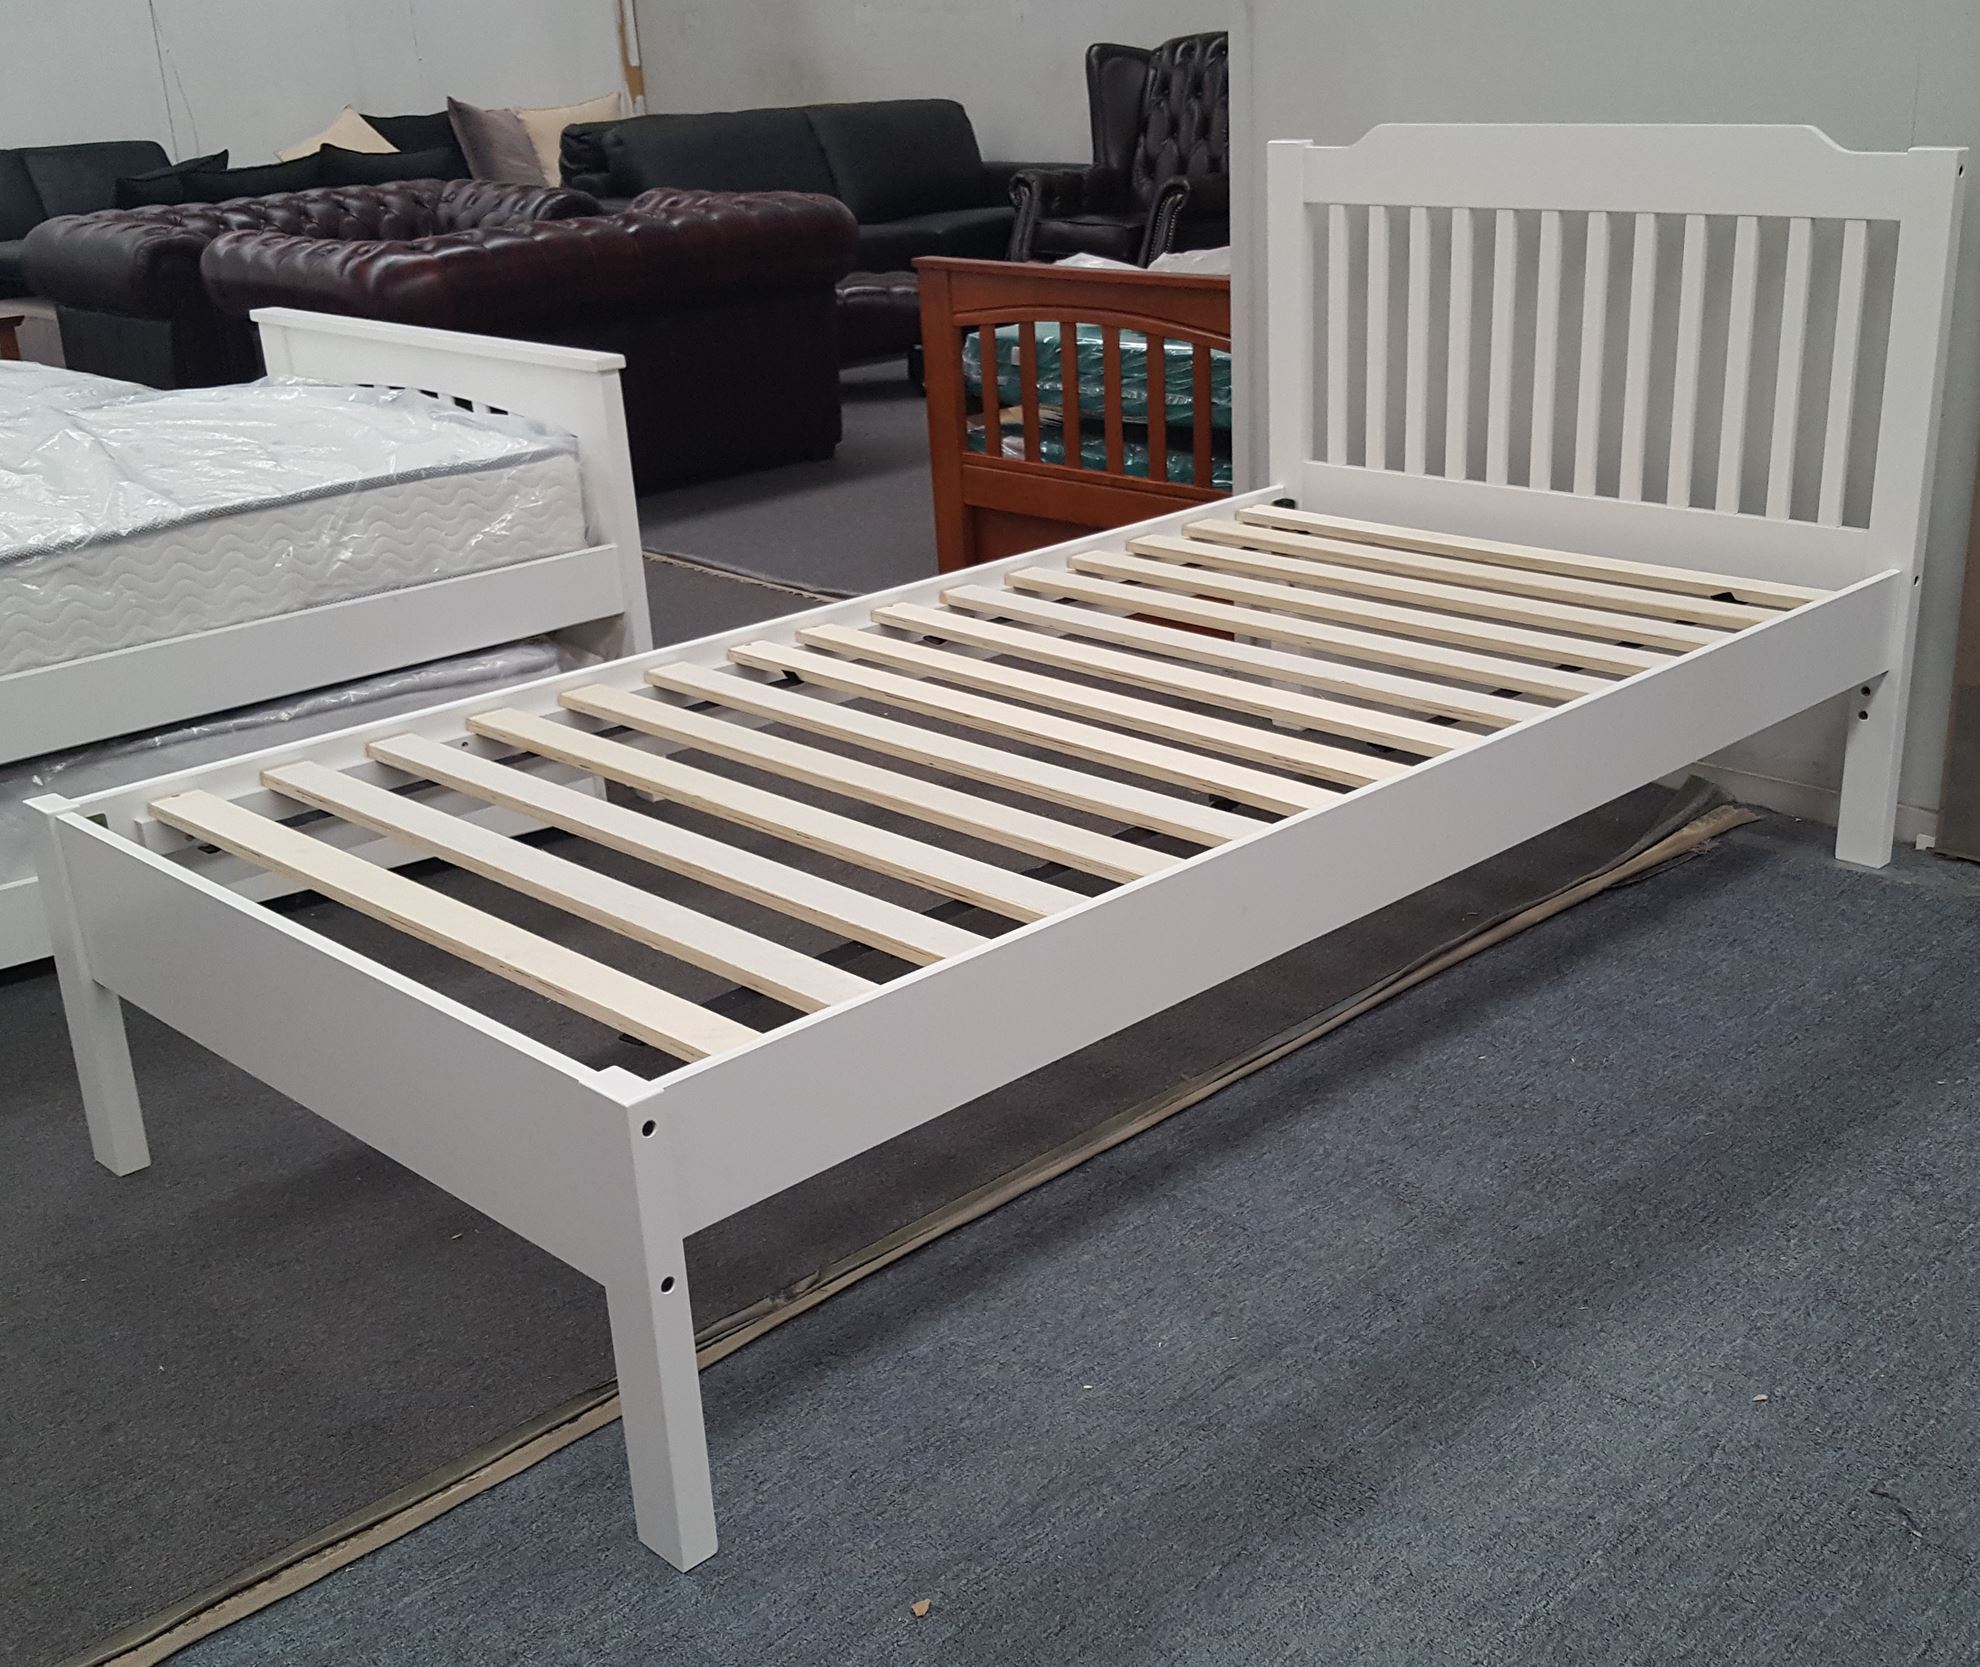 Chloe Single Bed Adjustable Base Height, King Size Bed Frame Height